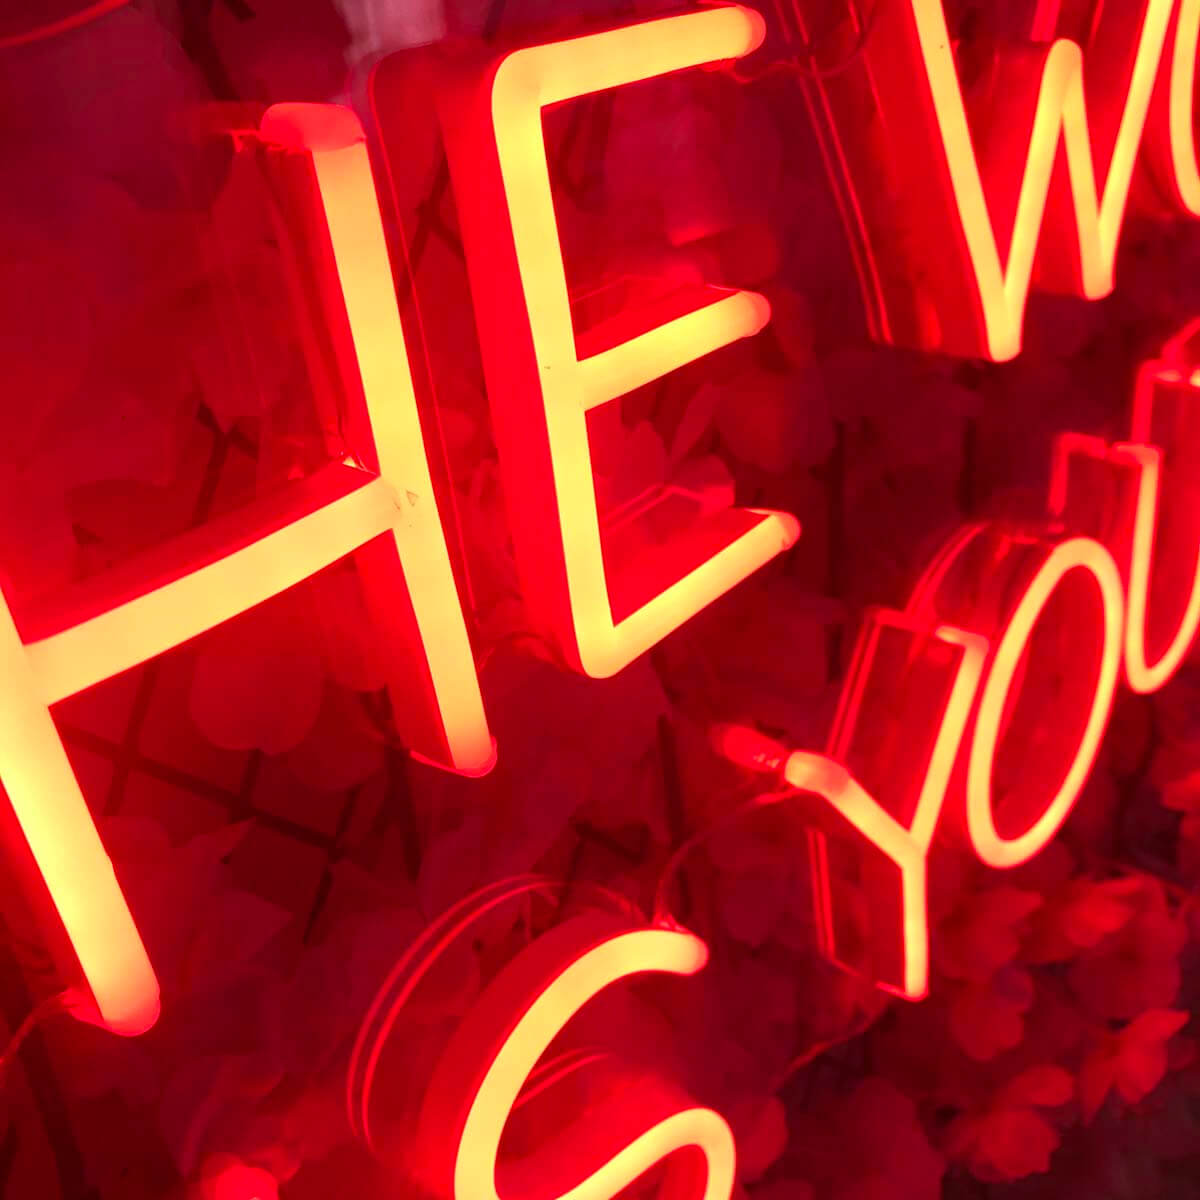 THE WORLD IS YOURS Neon Signs